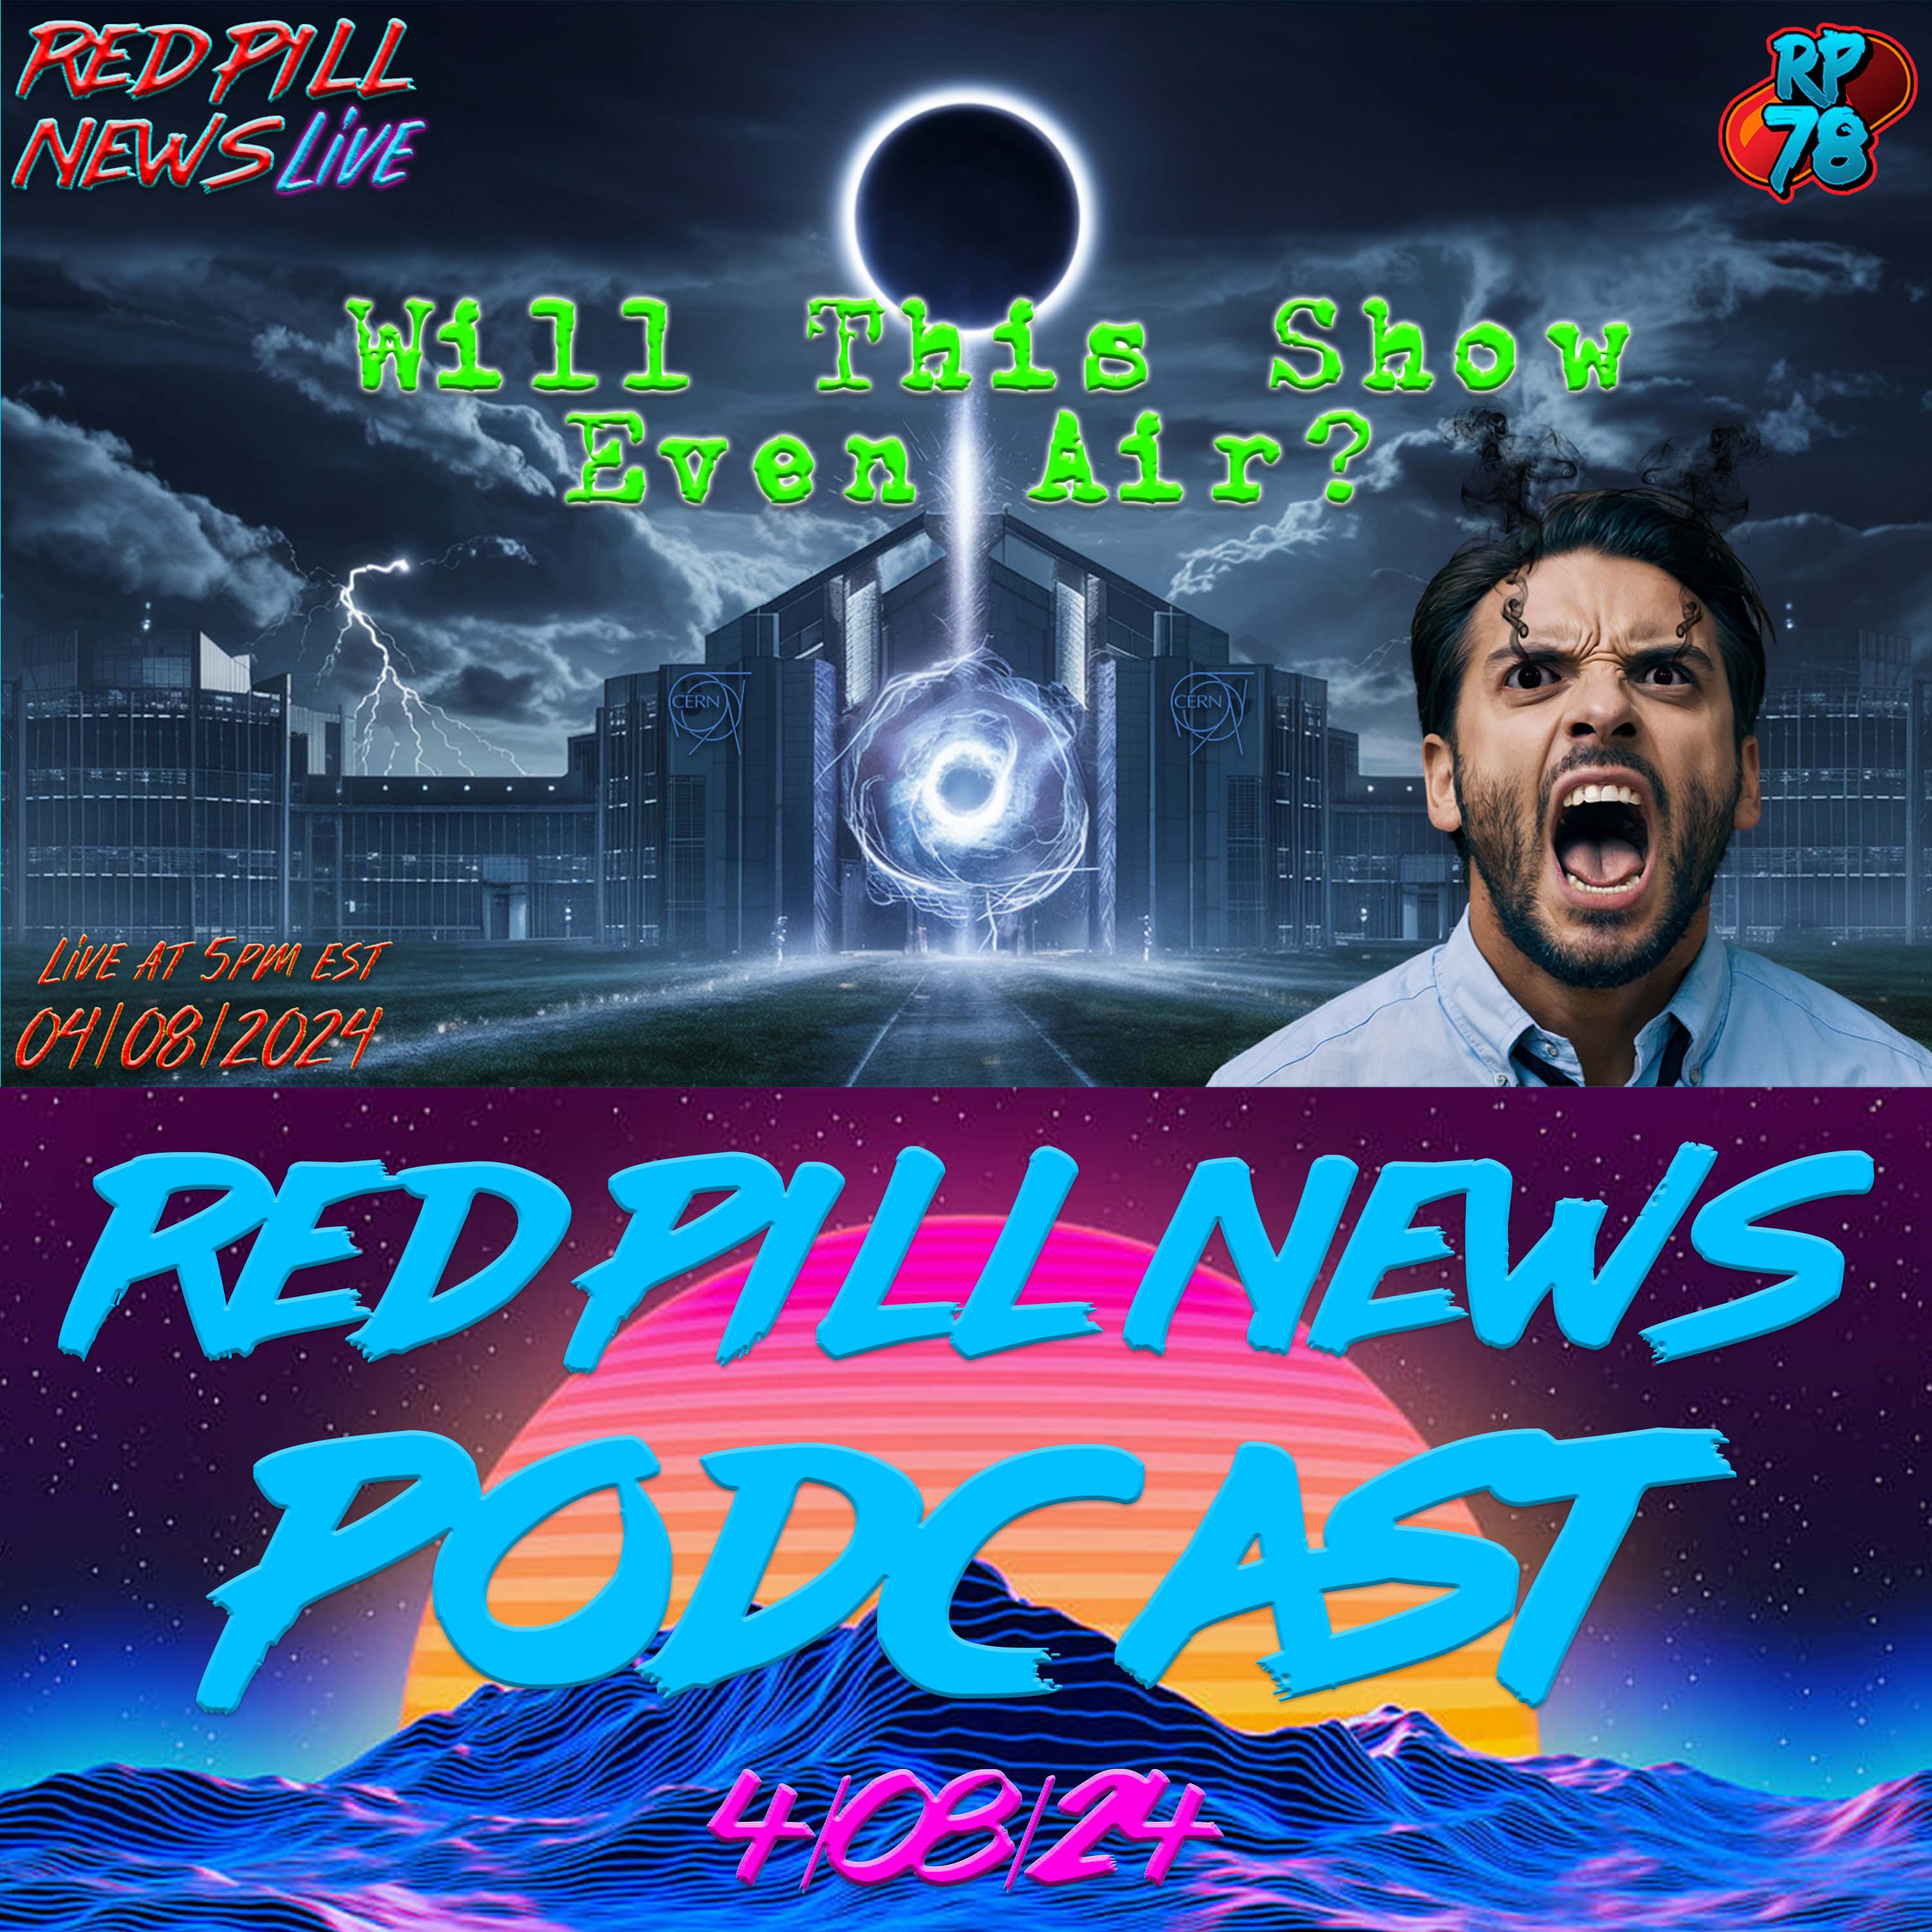 Eclipse Day Special Edition on Red Pill News Live